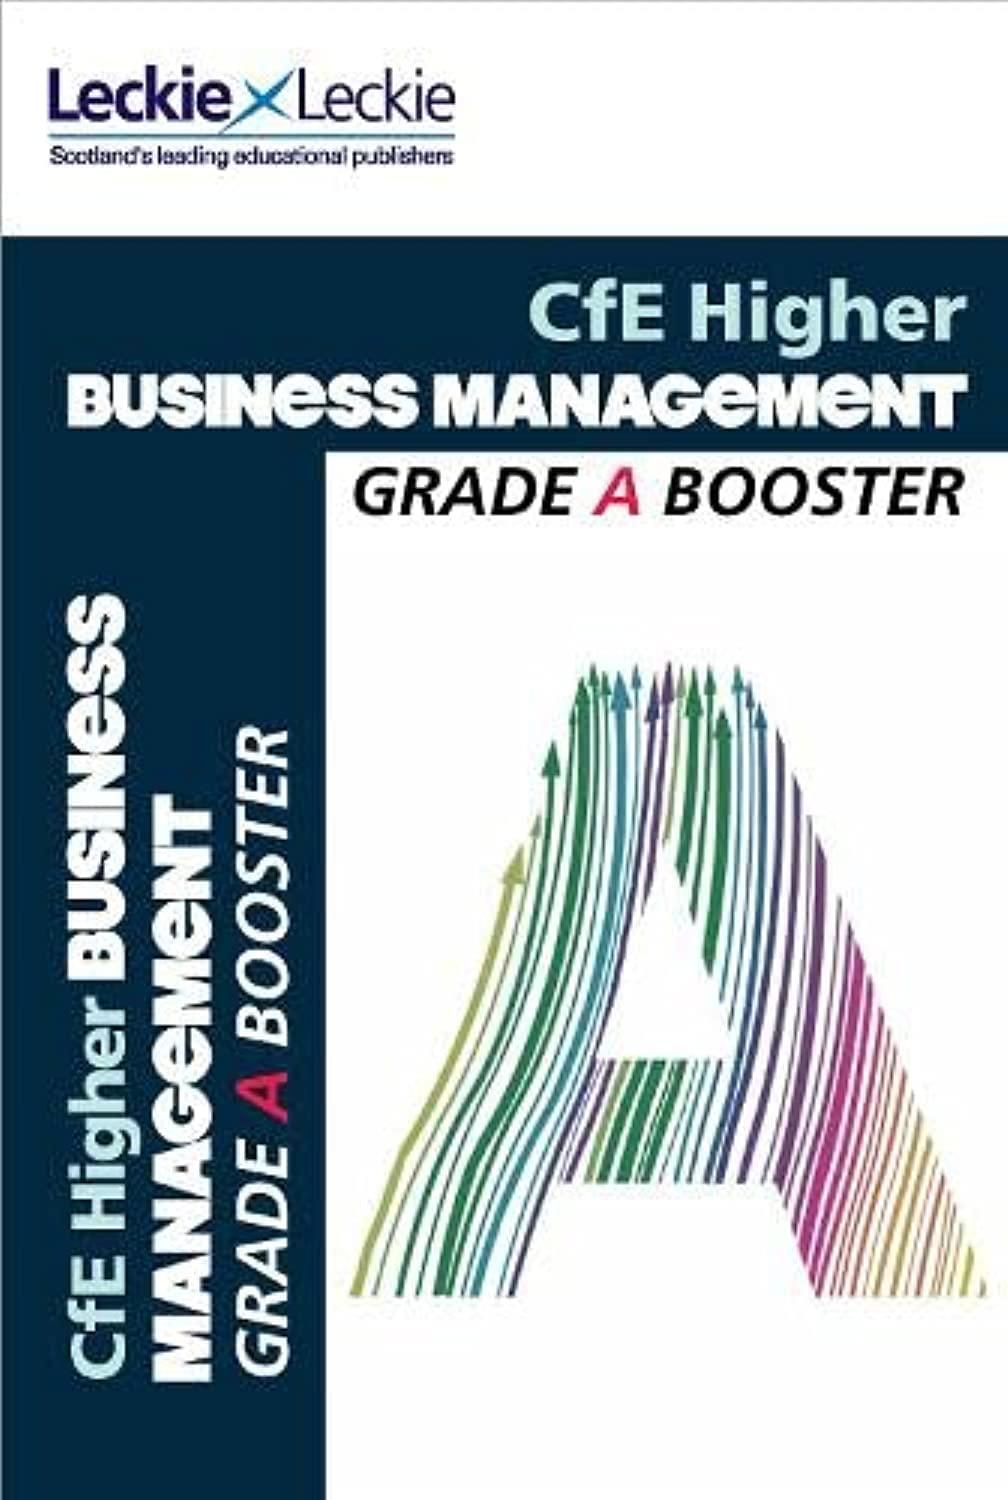 cfe higher business management grade a booster 1st edition anne ross, leckie 0007590873, 978-0007590872